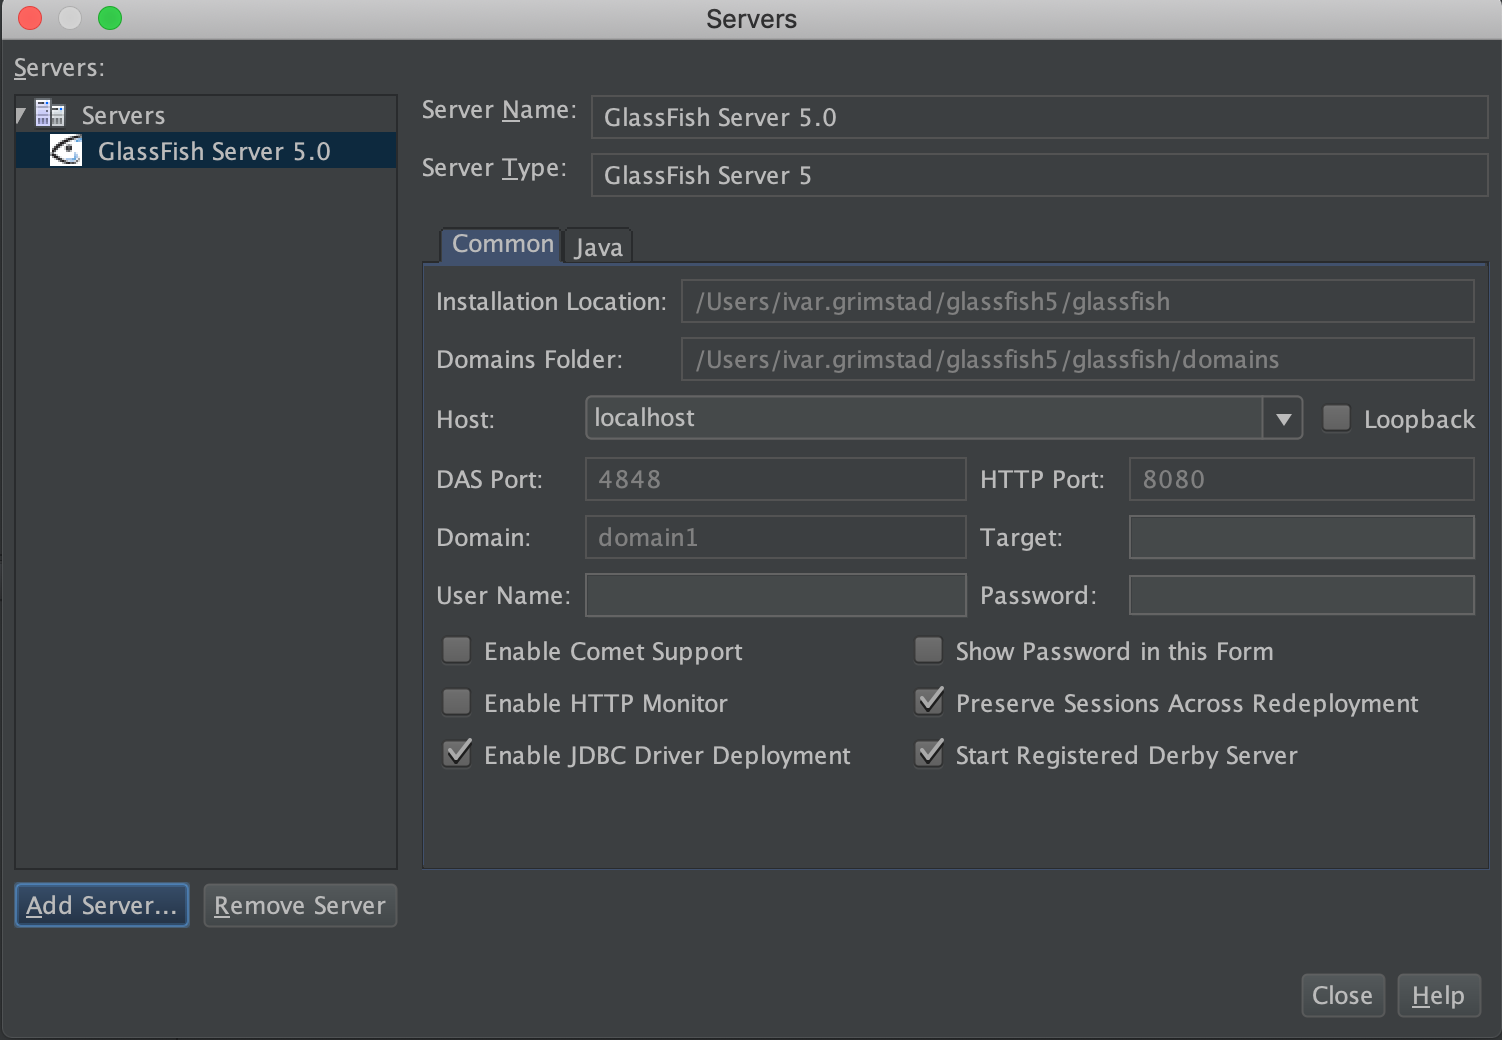 free download netbeans for mac os x